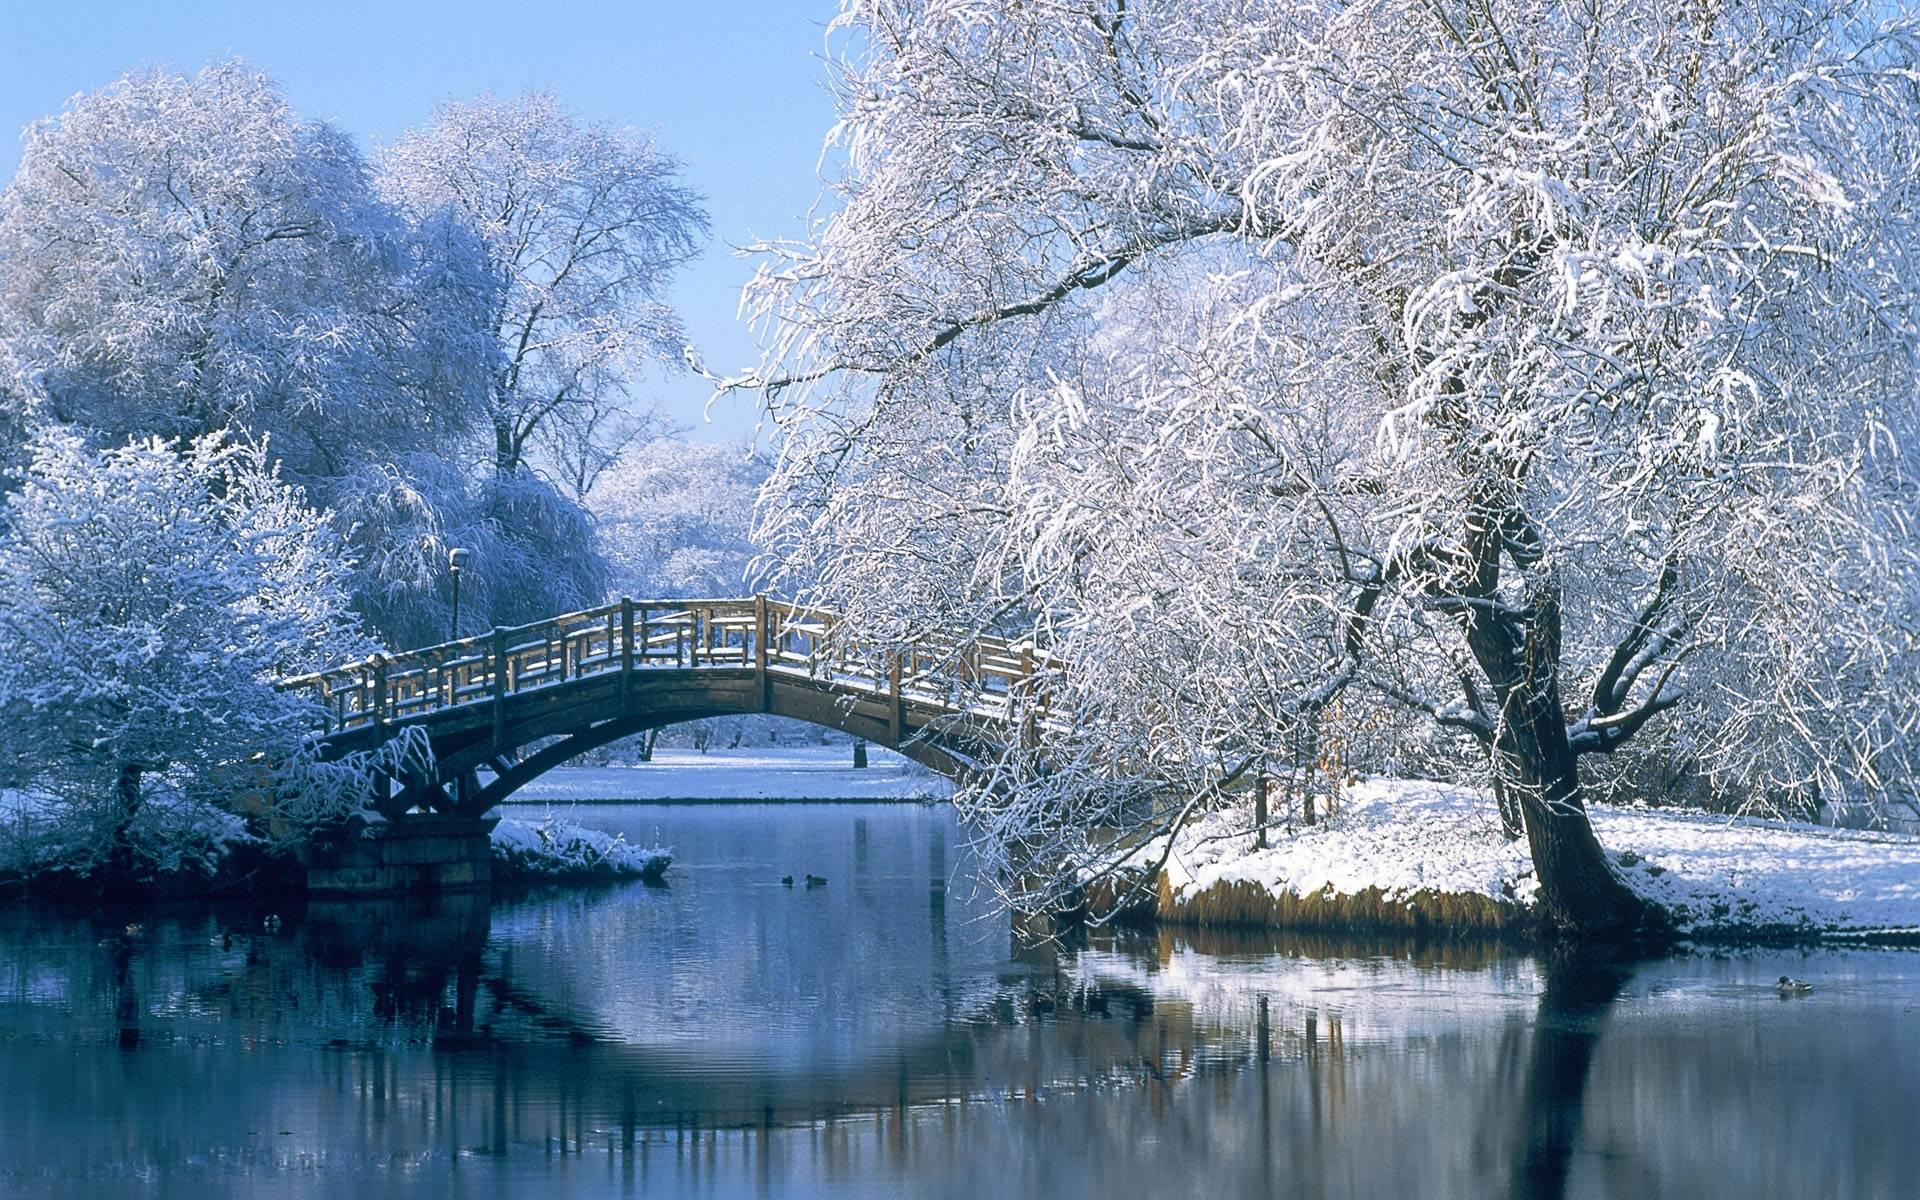 1920x1200 Winter Scenery Wallpapers Top Free Winter Scenery Backgrounds